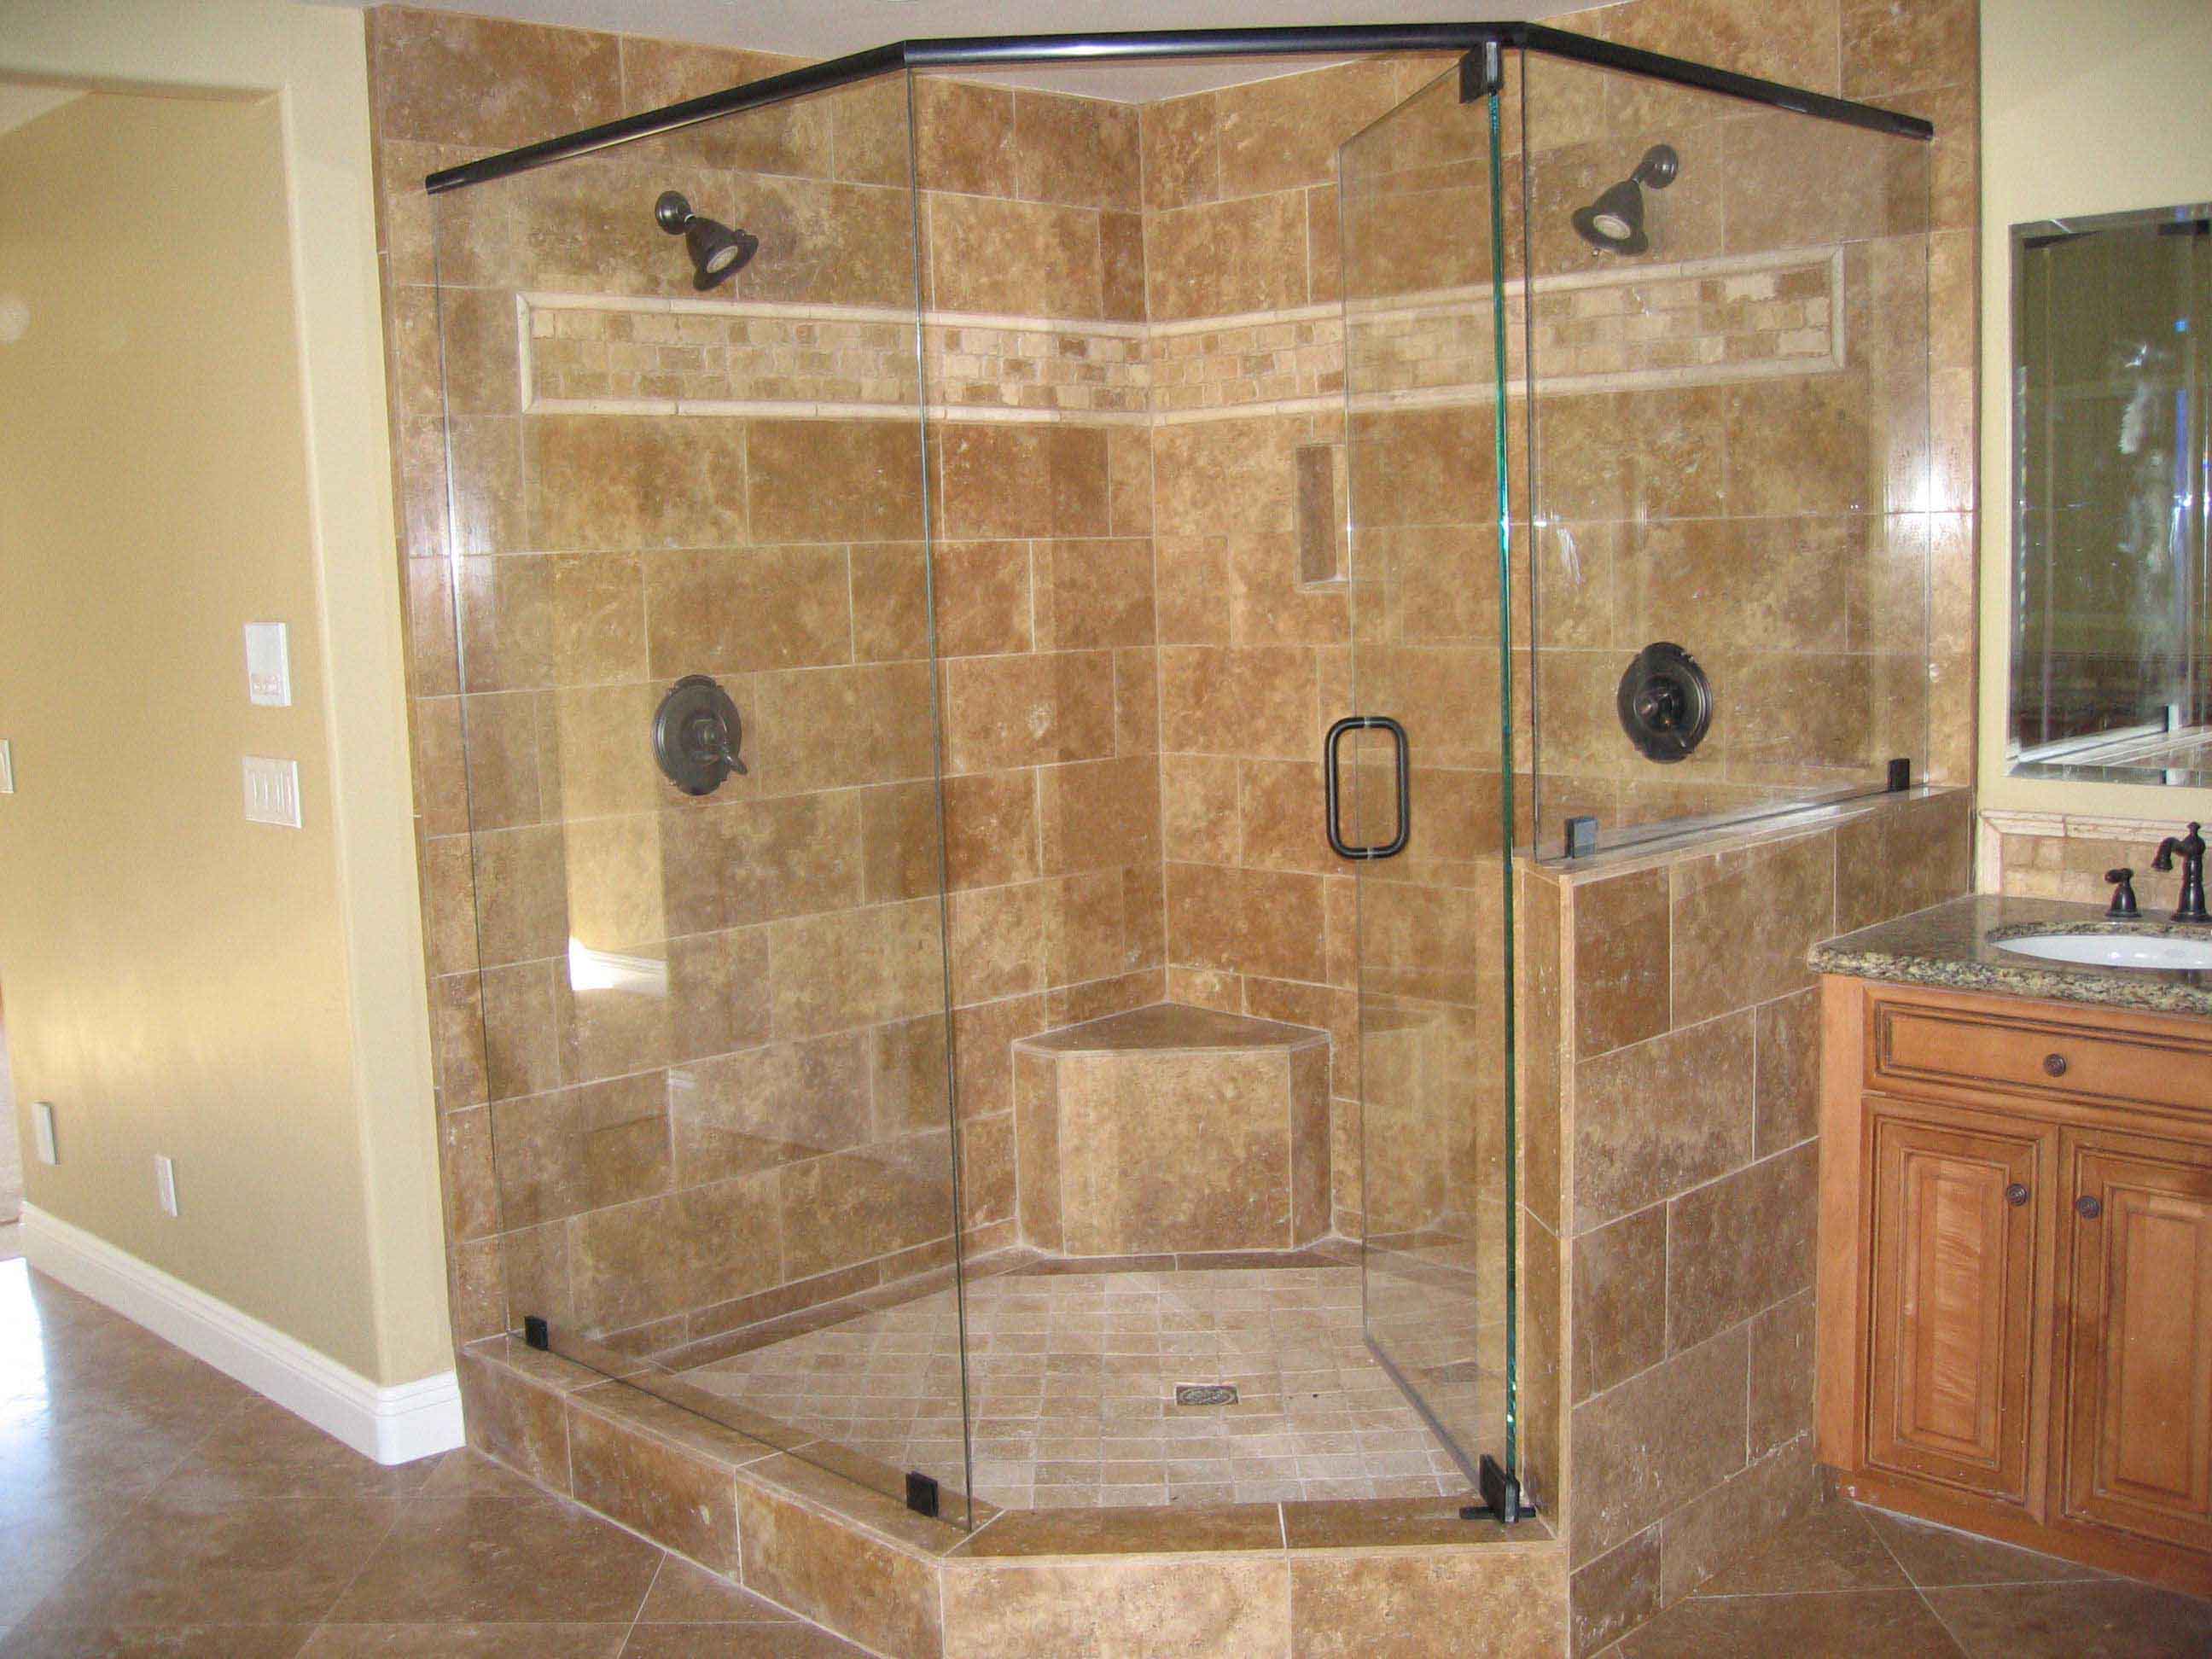 Shower Tile Installation Cost Guide And, Tiles For Shower Stalls